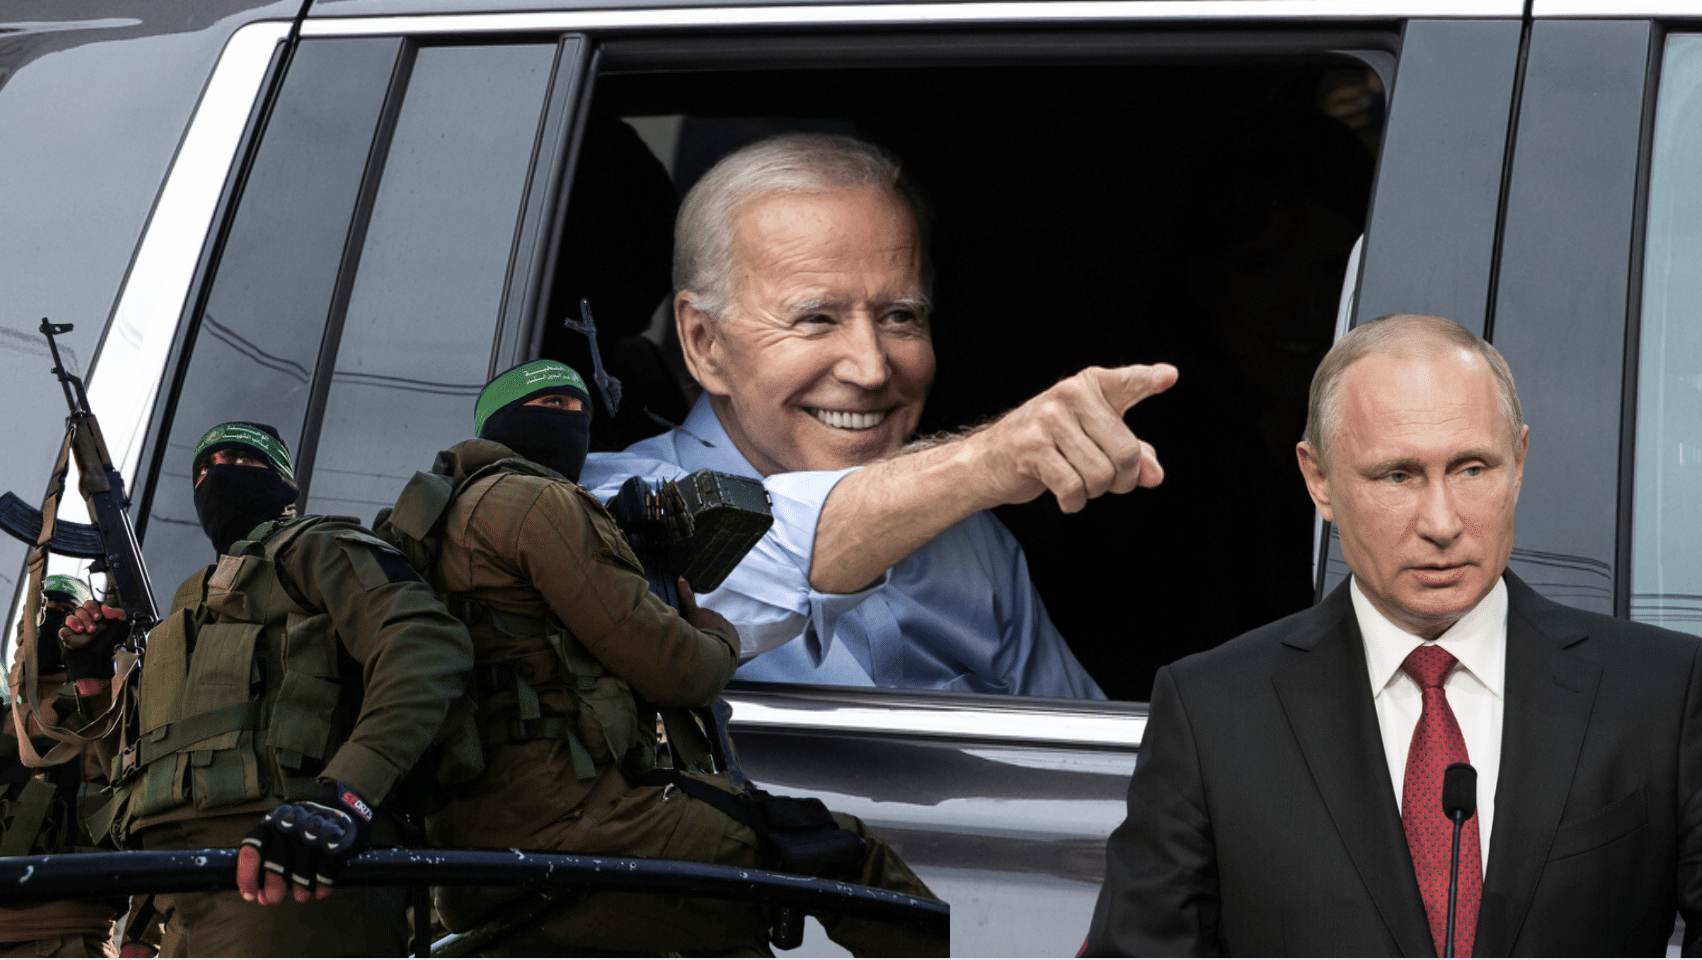 Putin furious and threatens nuclear war after Biden compares Russia to Hamas